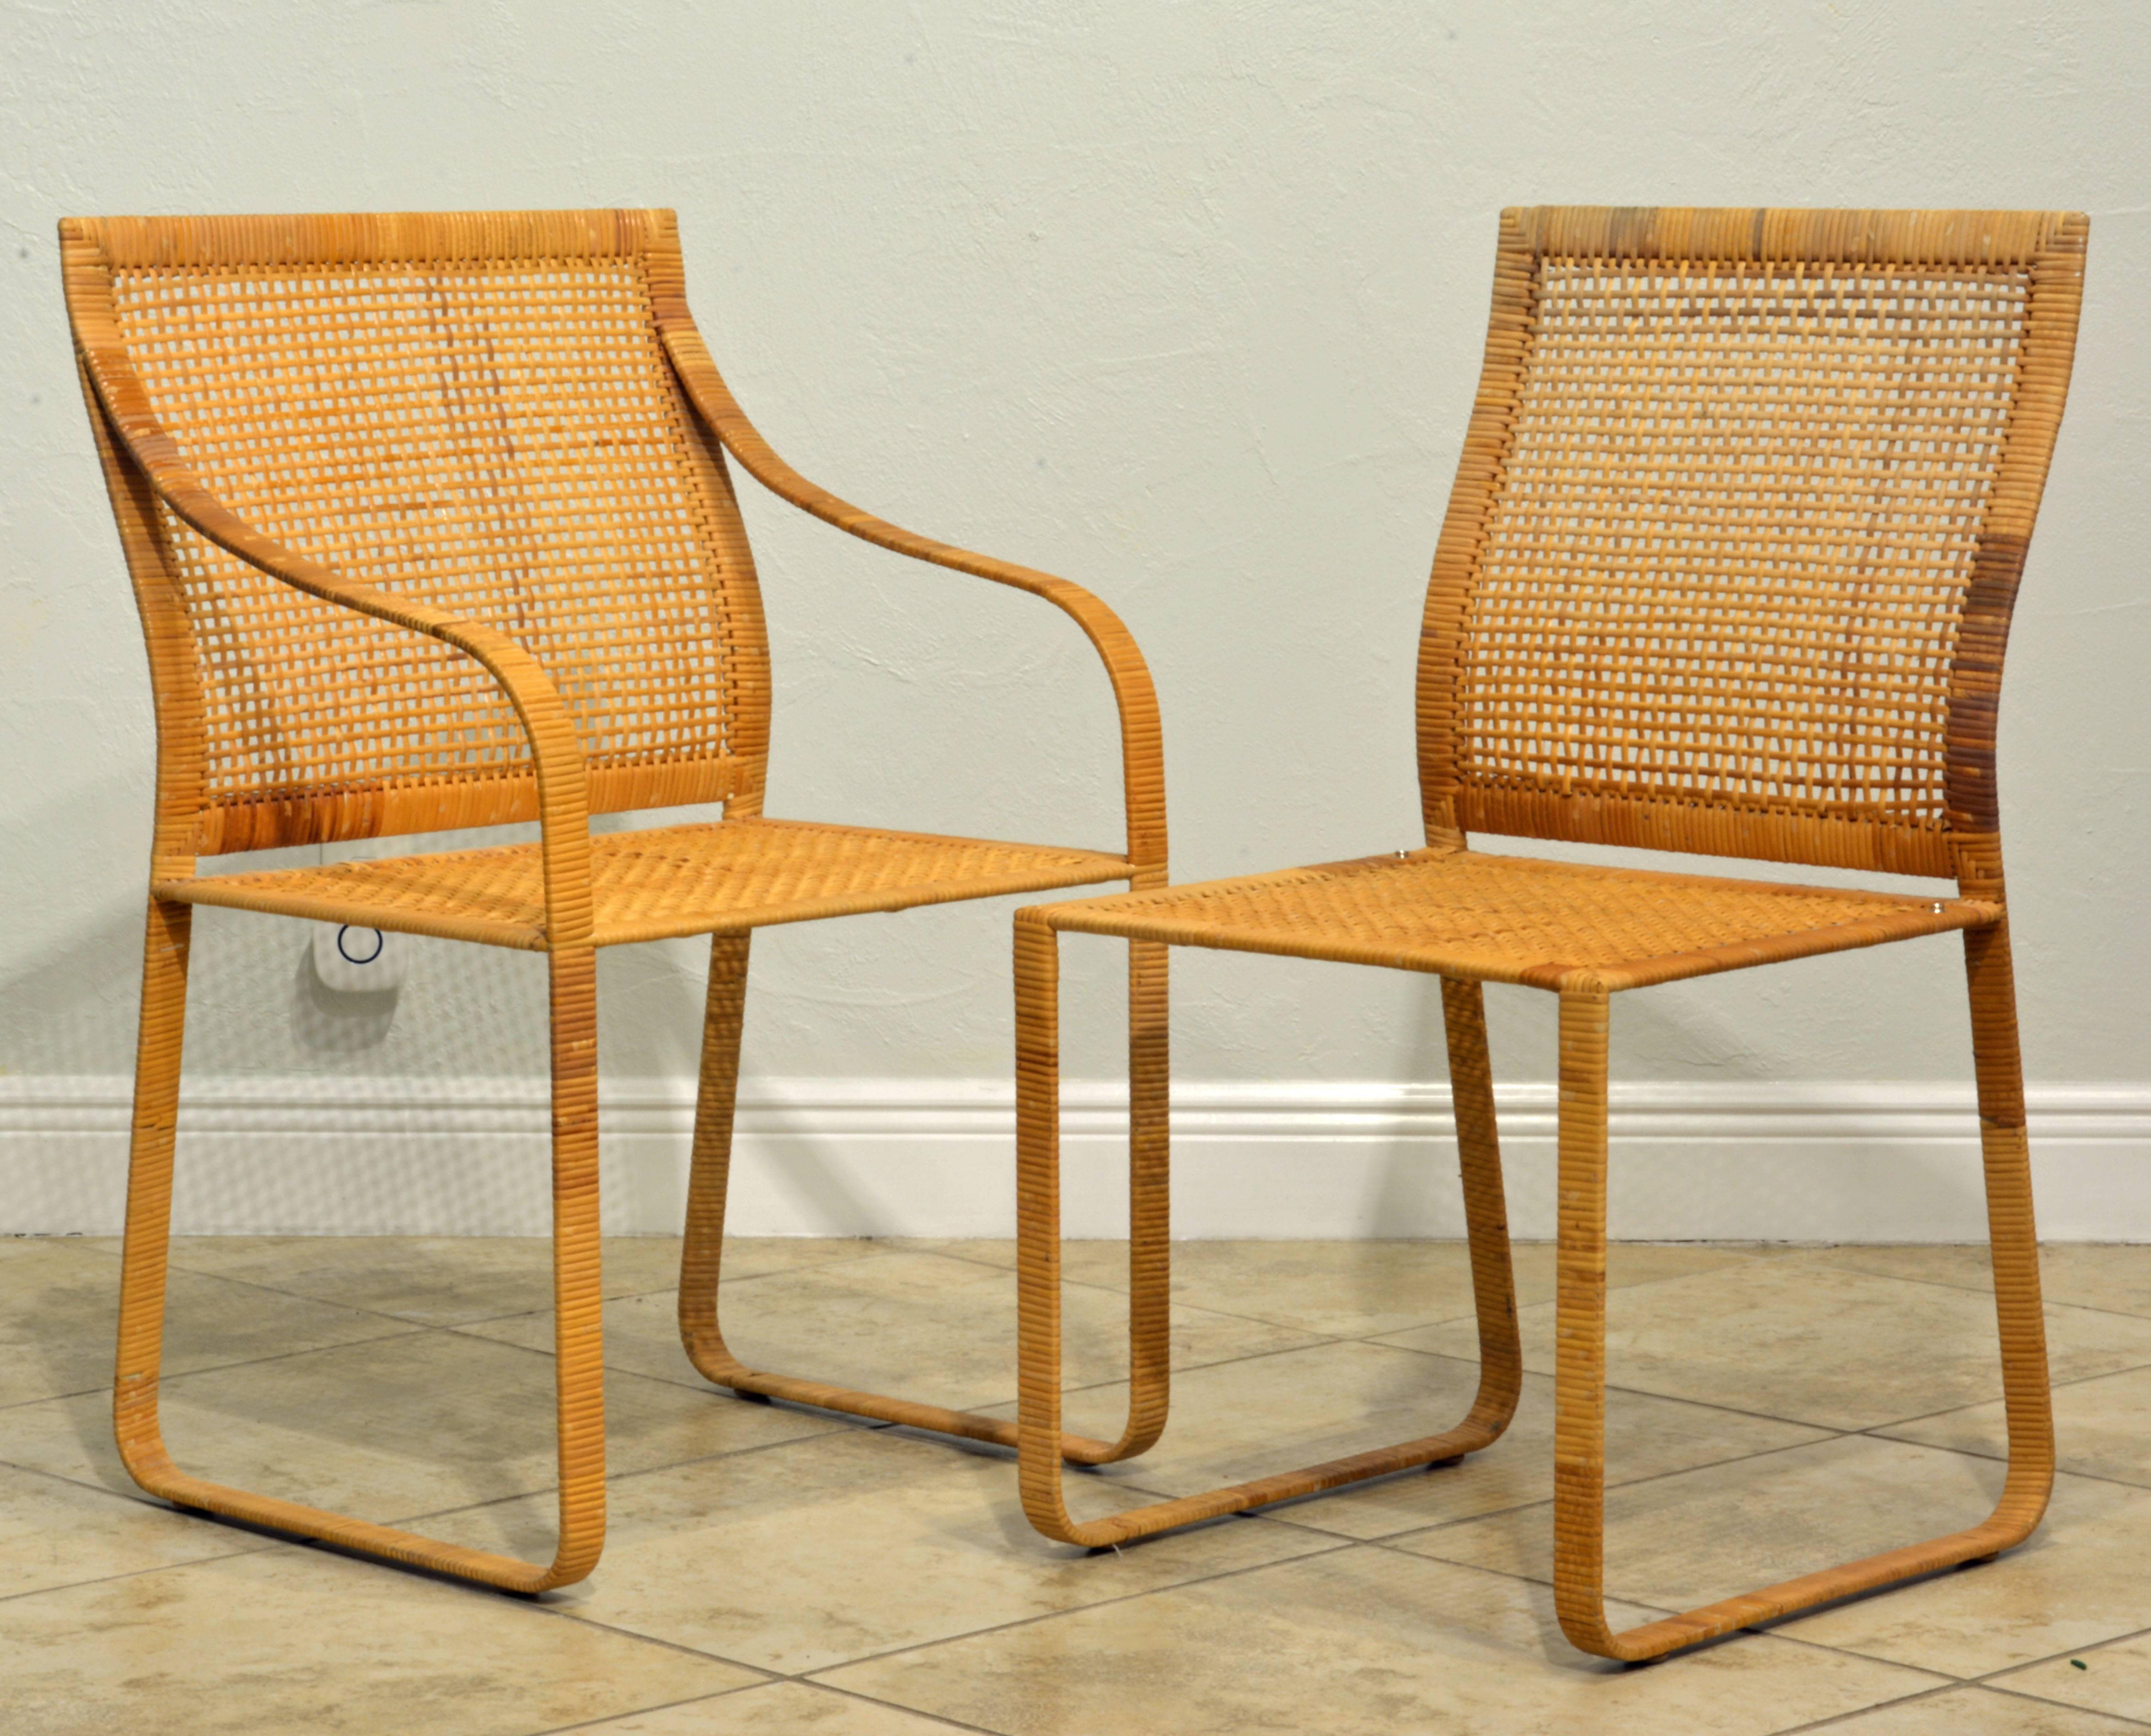 A set of six Harvey Probber dining chairs. Two-arm chairs and four side chairs. Woven rattan over steel frames. Overall great condition. Seats and backs with no breaks. A few loose woven ends on arms or legs. Not marked. Very heavy and sturdy. Comes